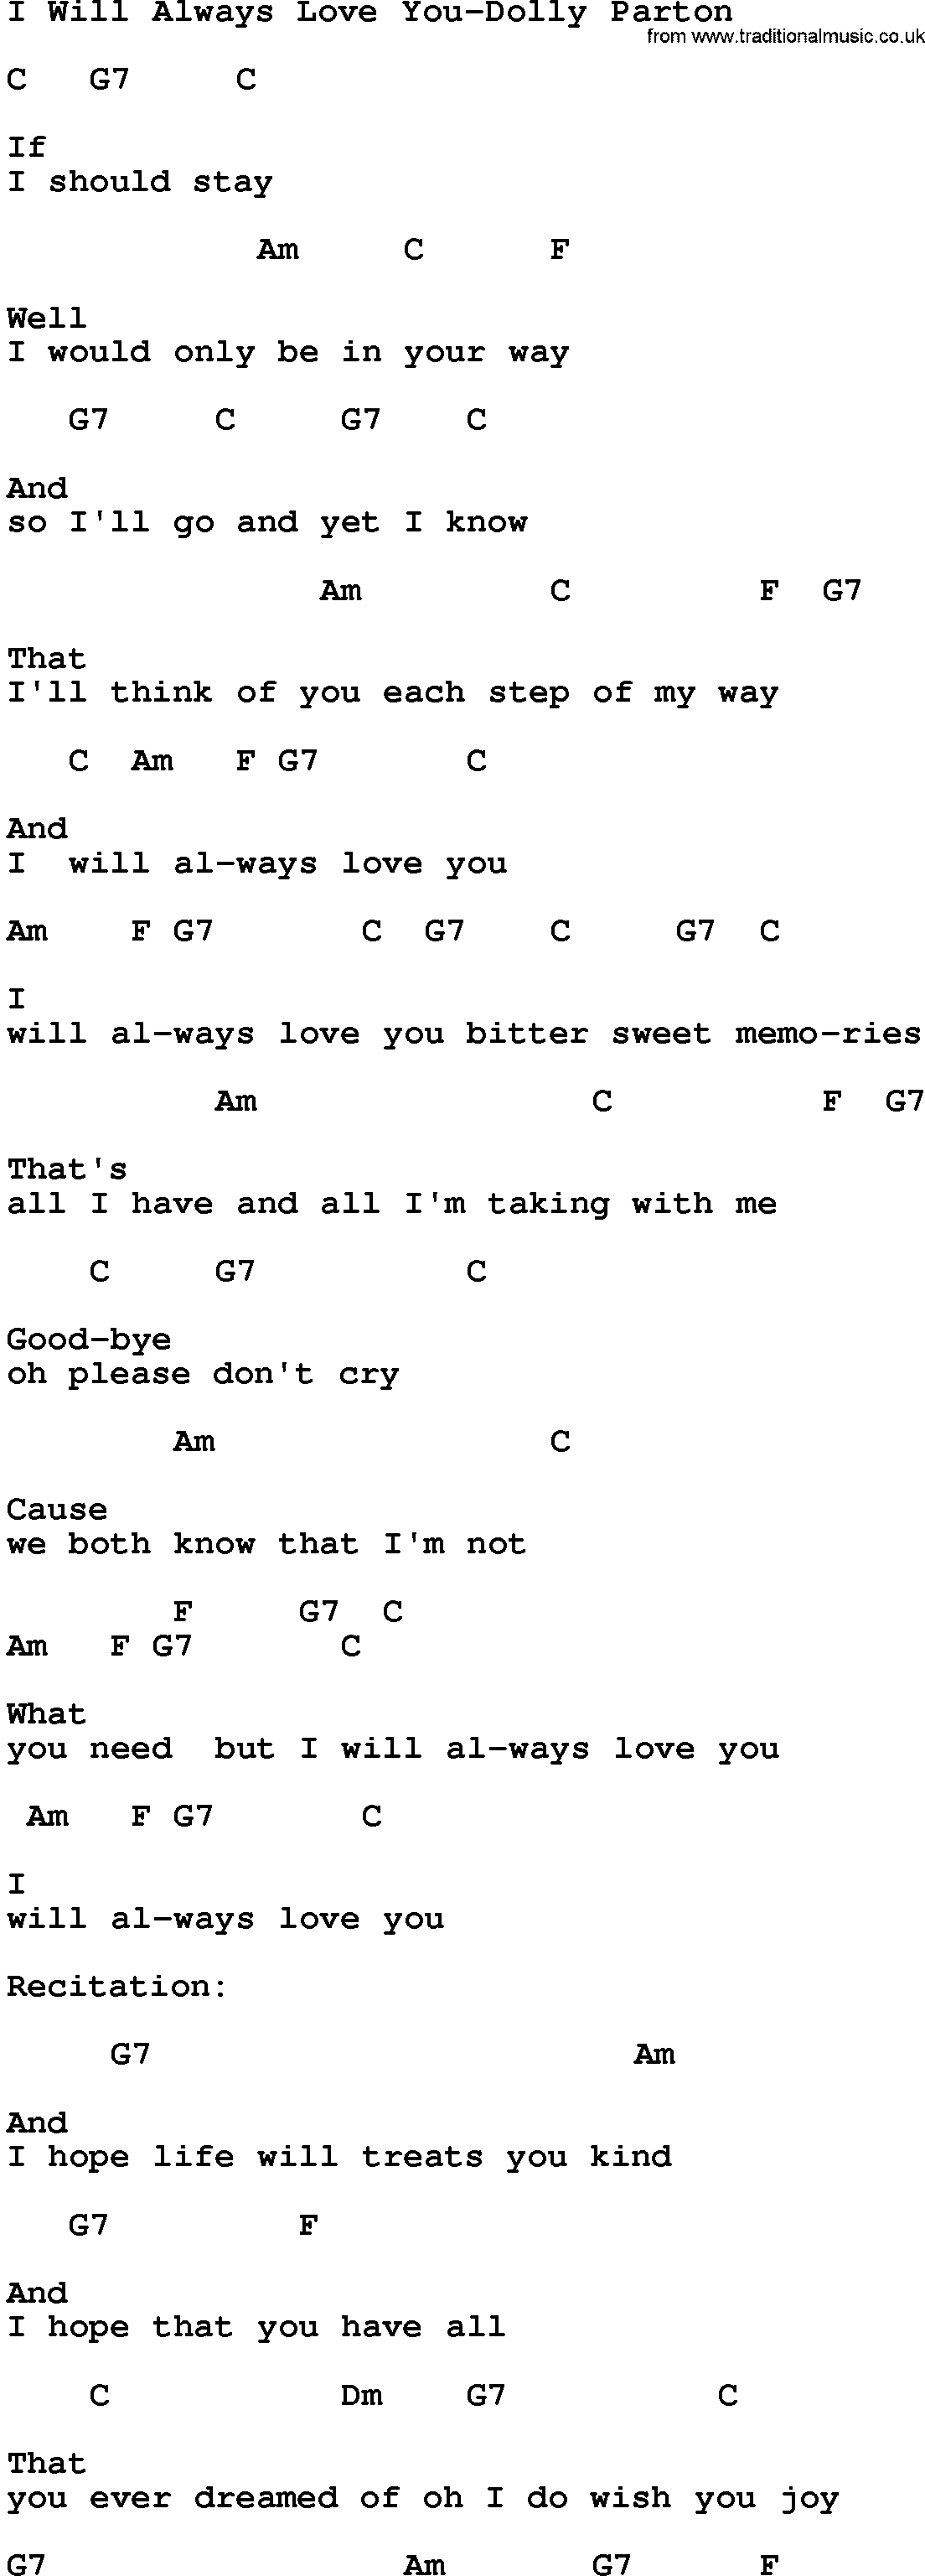 Country music song: I Will Always Love You-Dolly Parton lyrics and chords